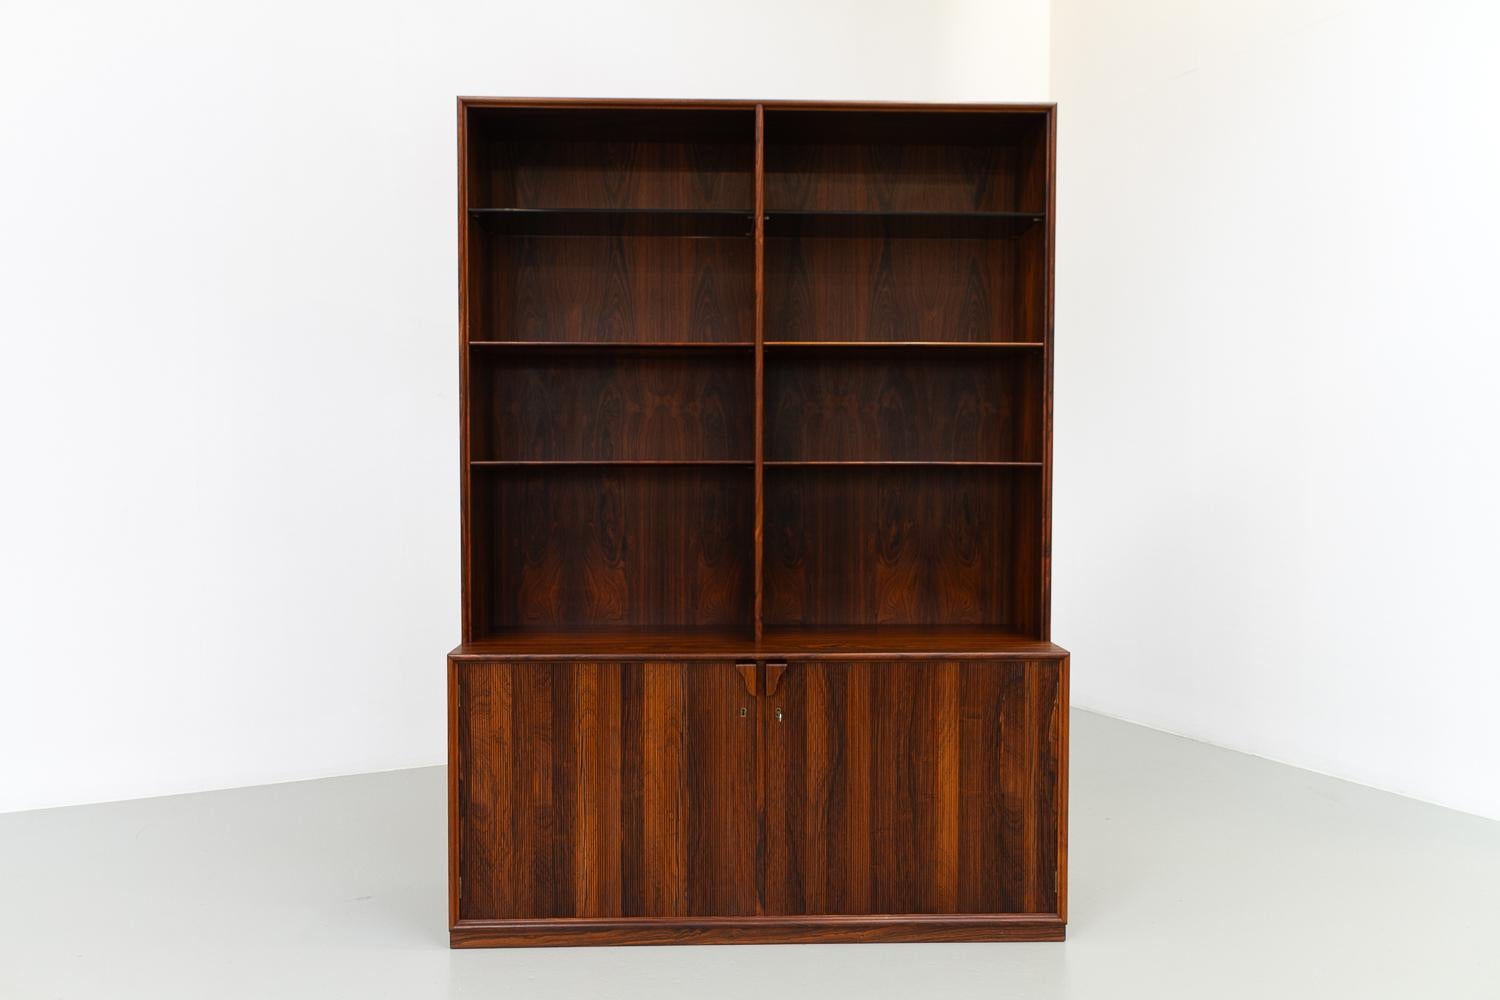 Danish Modern Rosewood Bookcase by Frode Holm for Illums, 1950s.
Danish Mid-Century Modern bookcase with cabinets in Rosewood/palisander by Danish architect Frode Holm for Illums Bolighus Copenhagen, Denmark.
Very elegant and high quality with